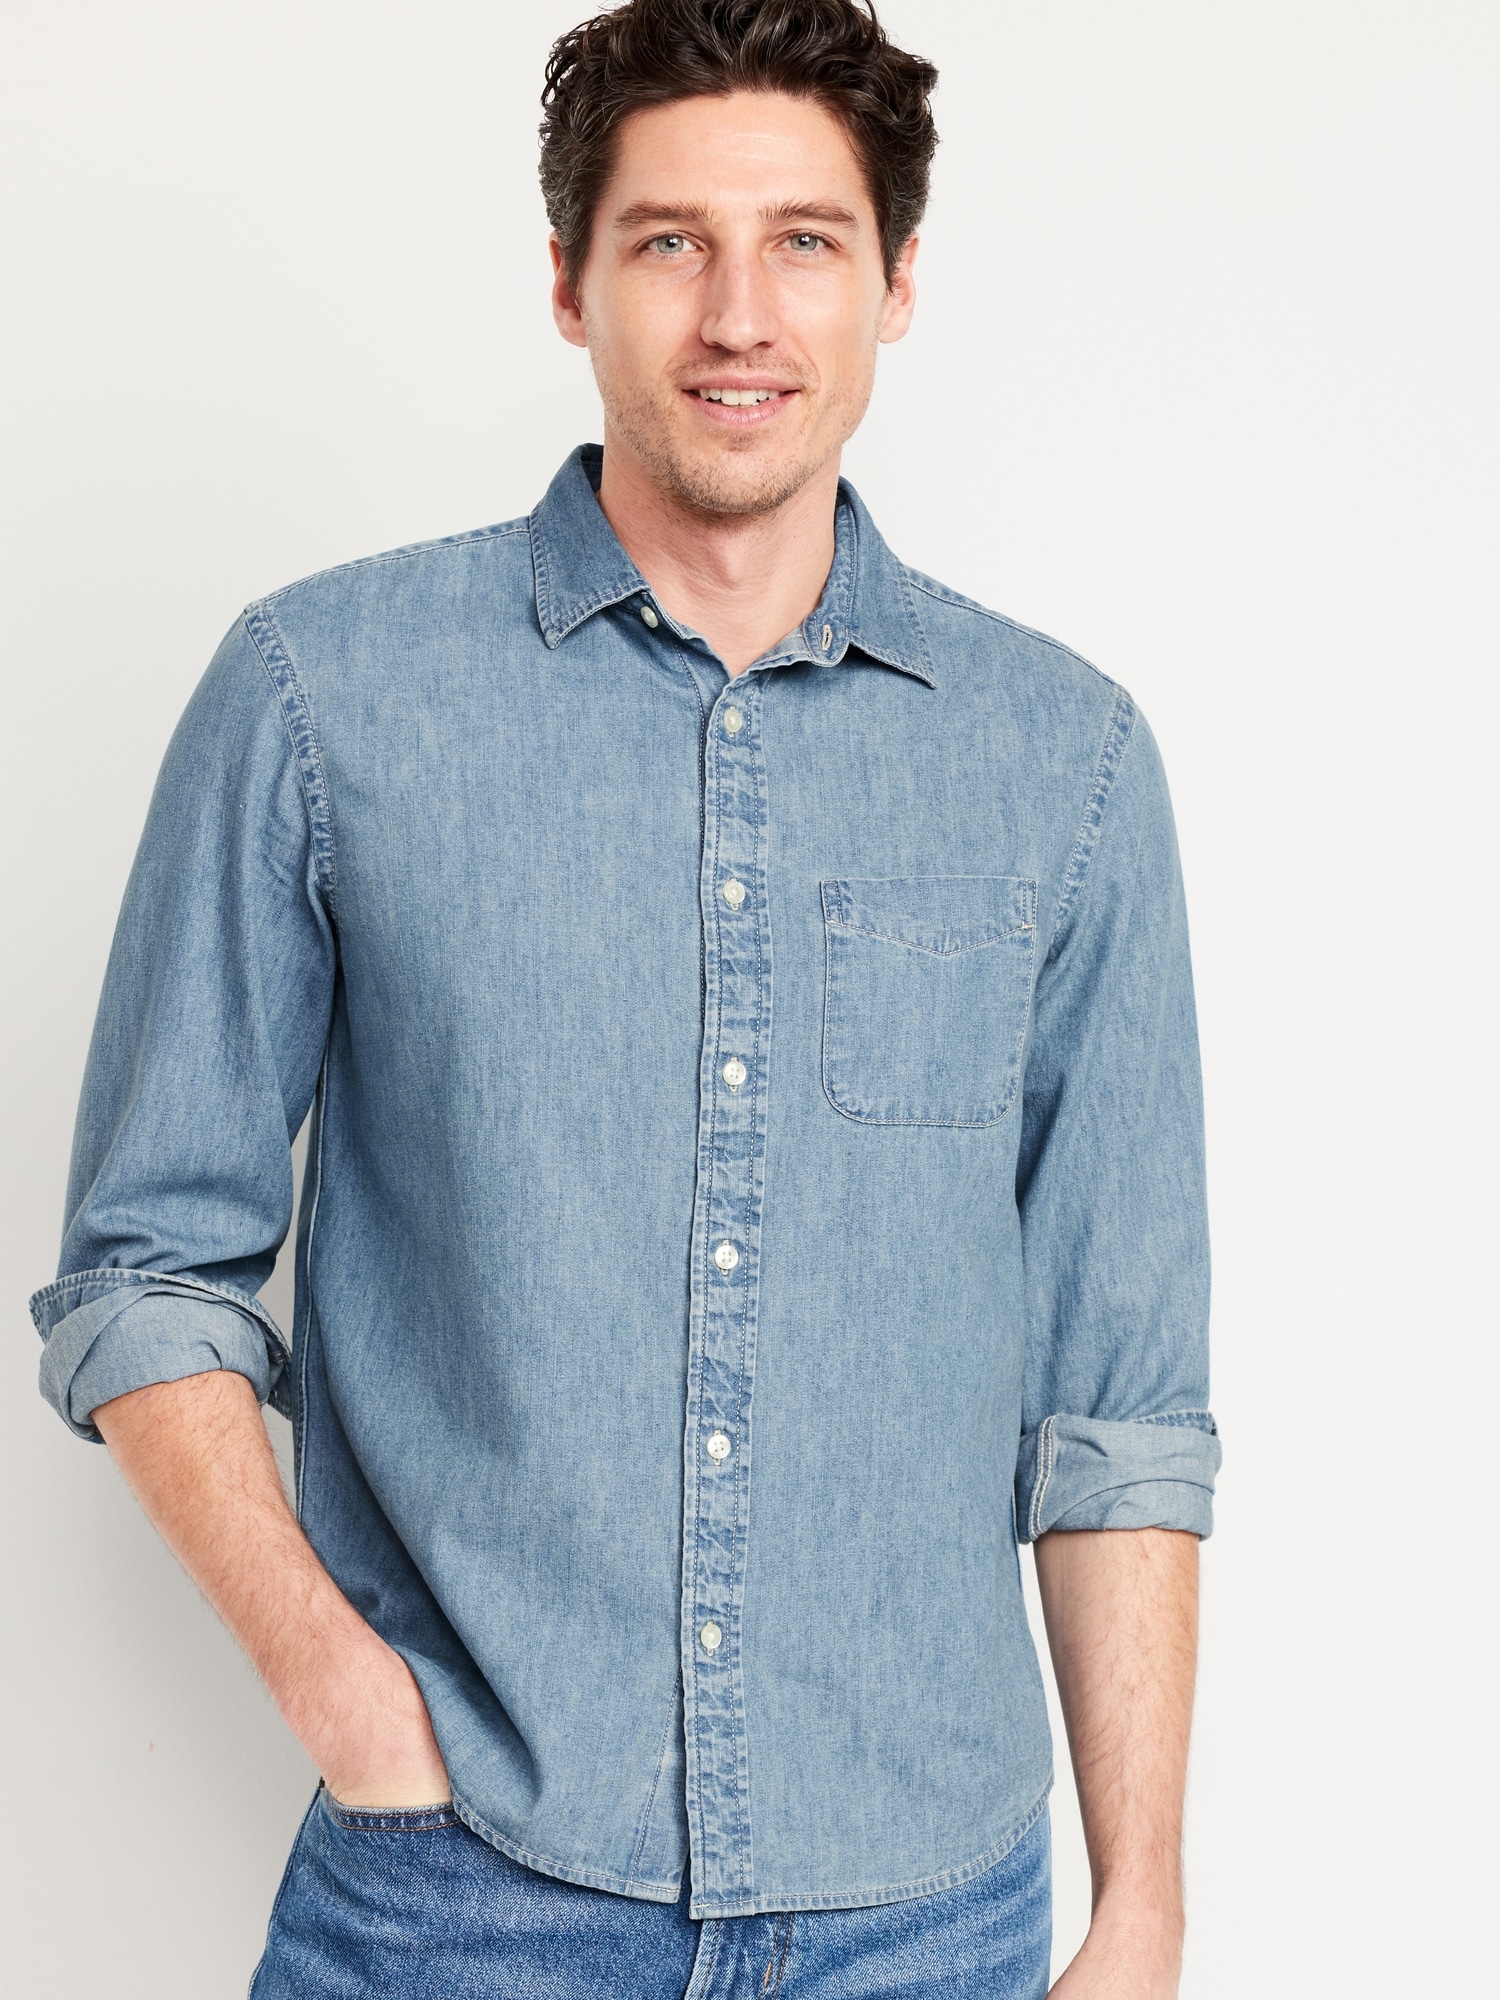 Should I Tuck In My Shirt? Here's The Low-Down! - Denim Is the New Black